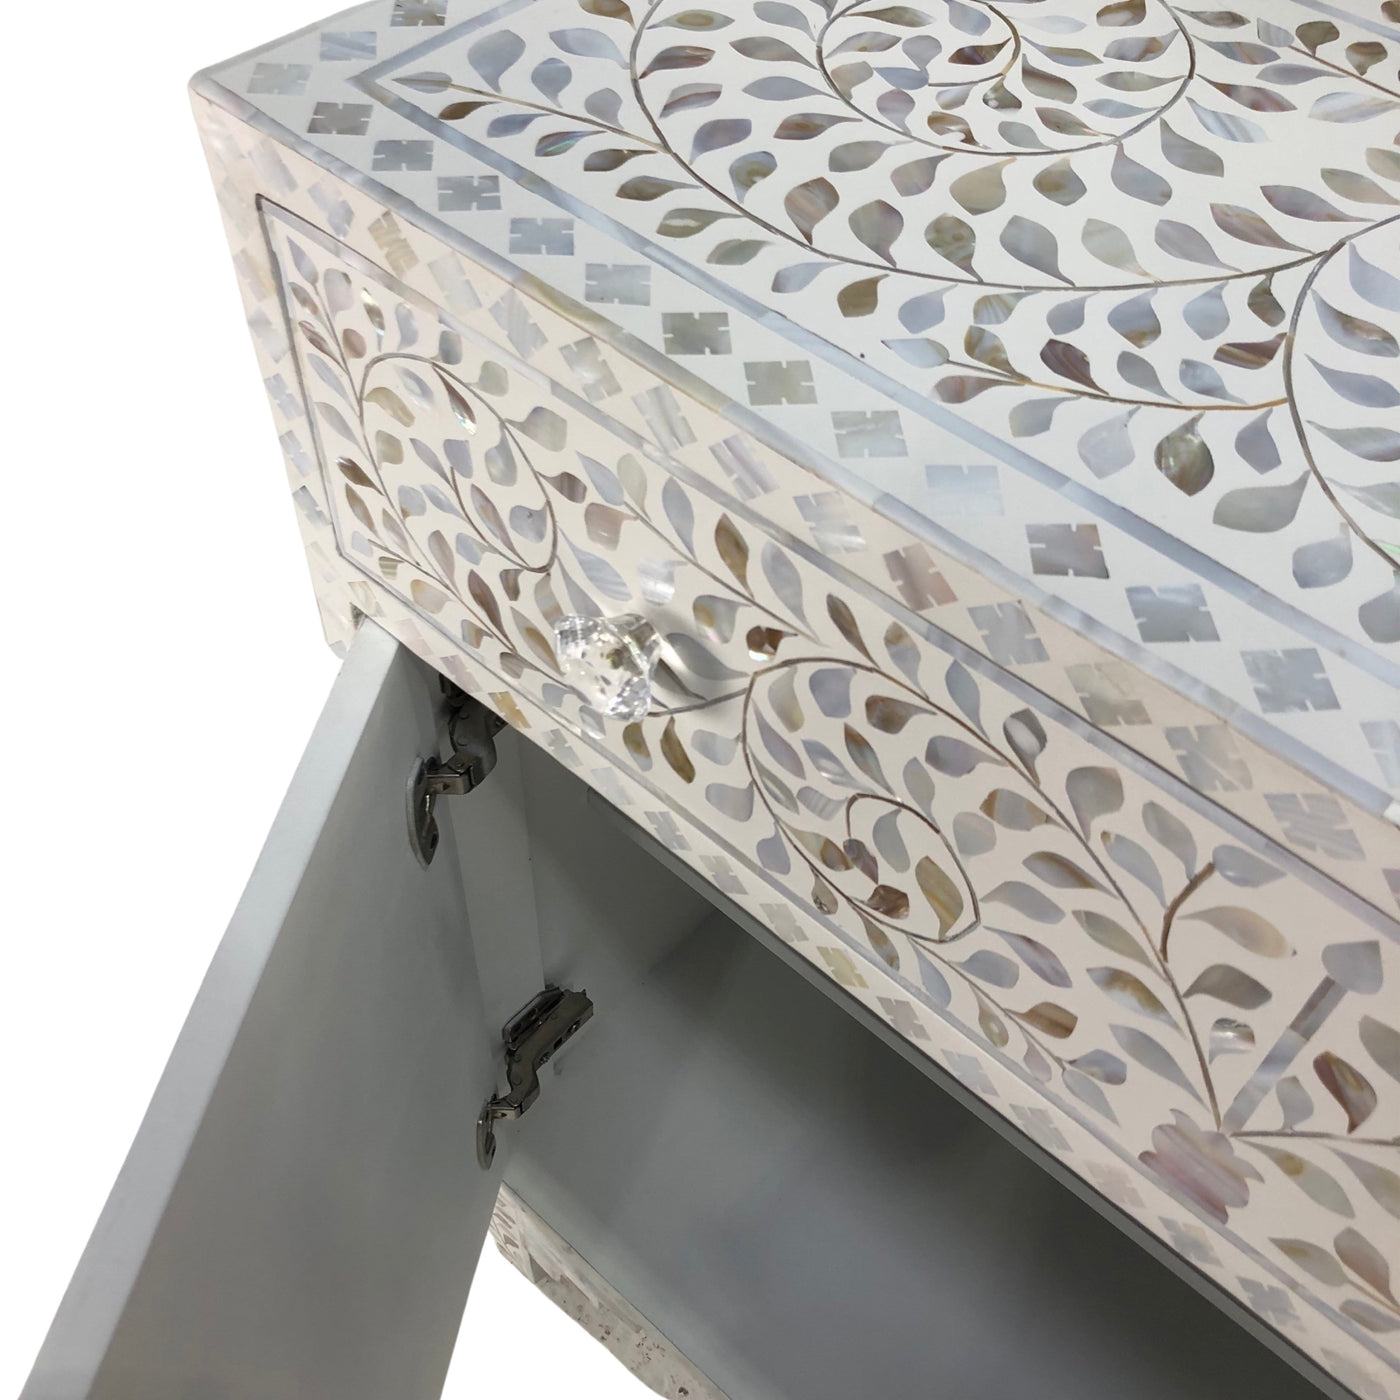 Mother of Pearl Inlay Furniture